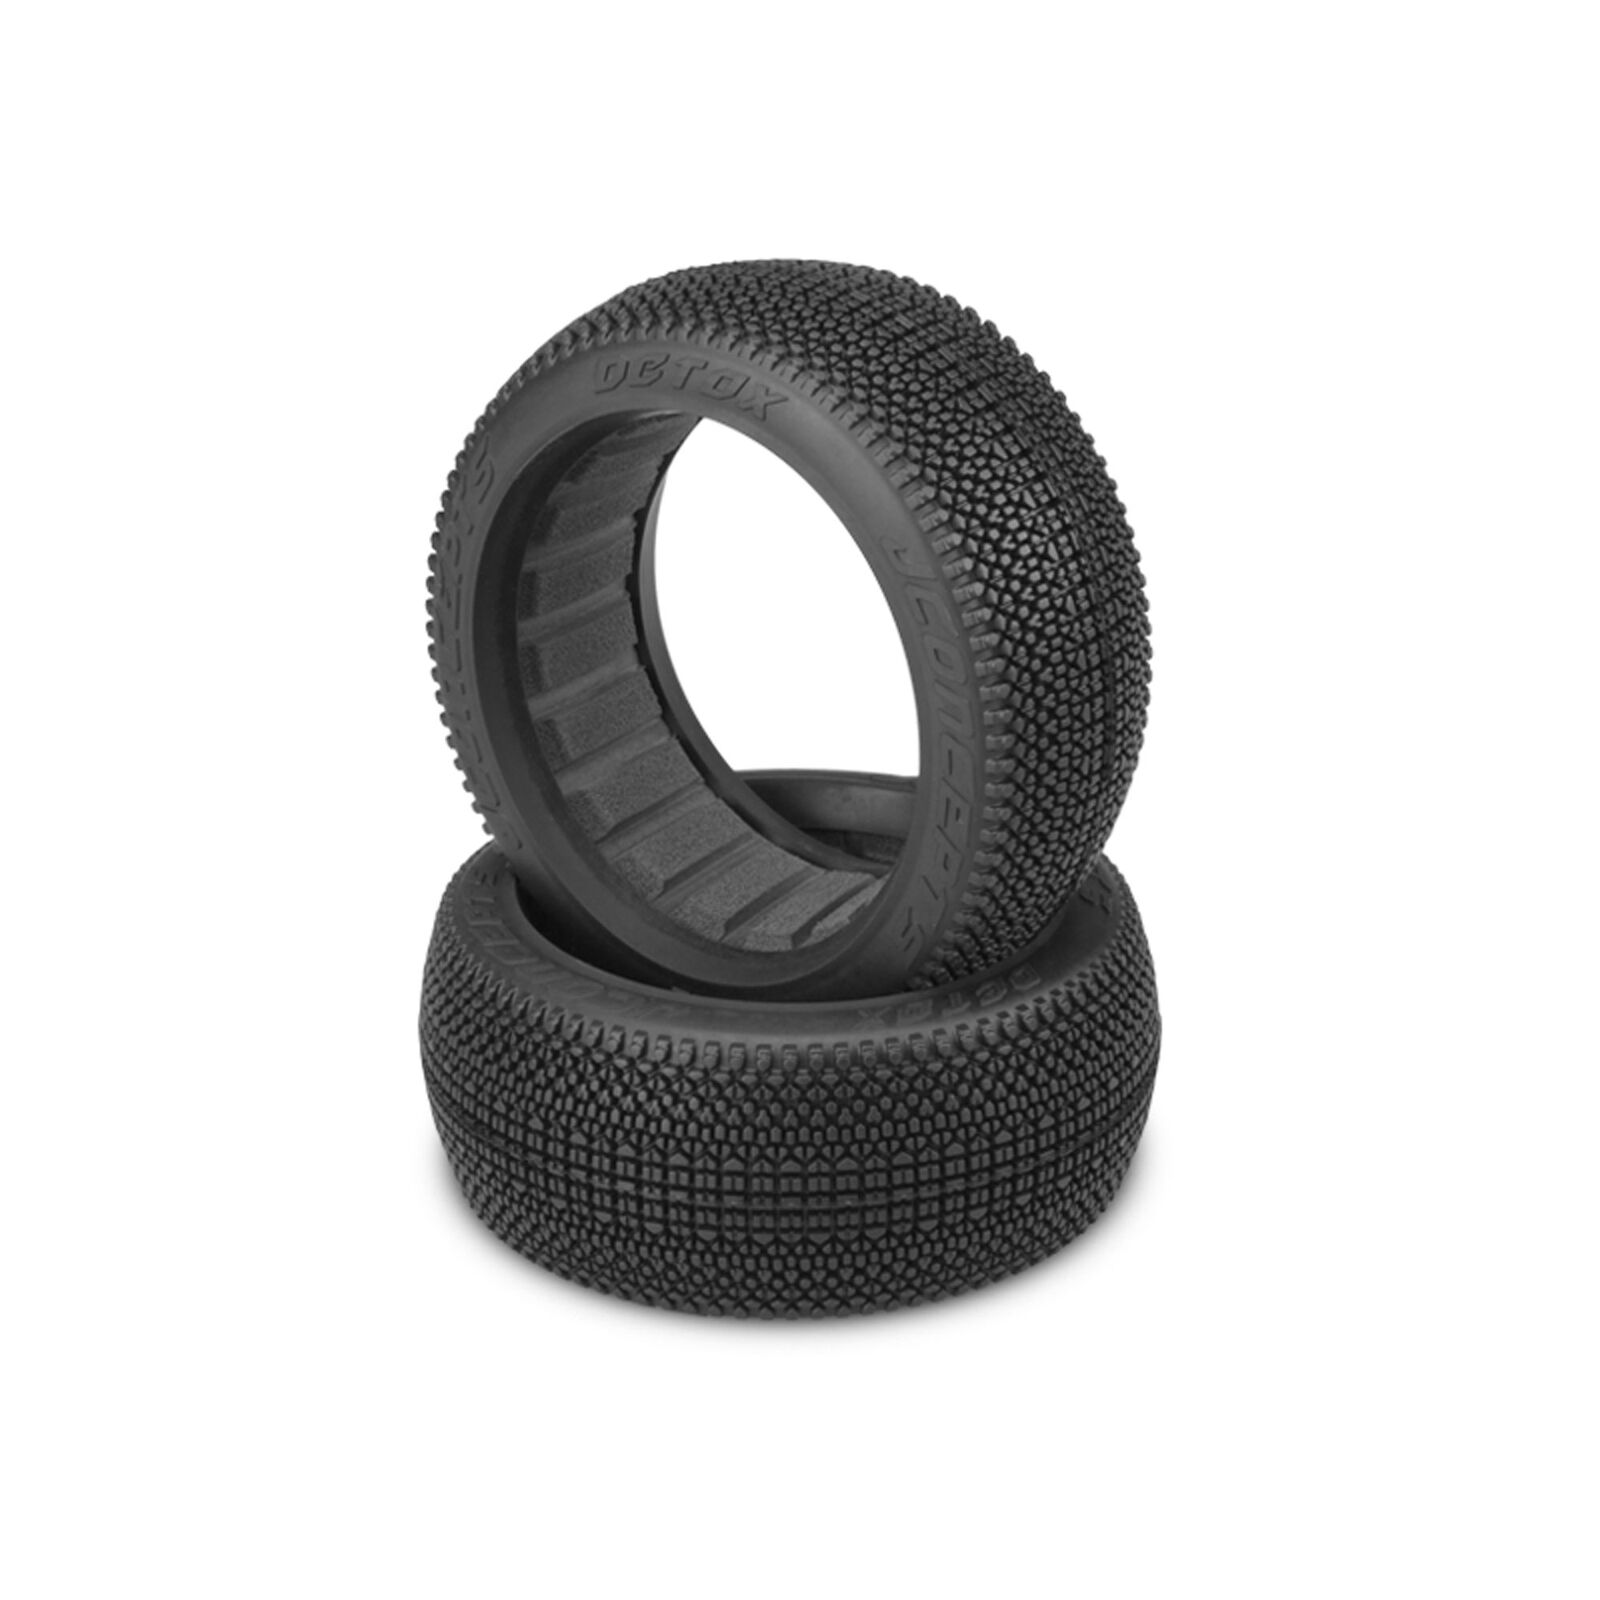 1/8 Detox 83mm Buggy Tires and Inserts, Green Compound (2)